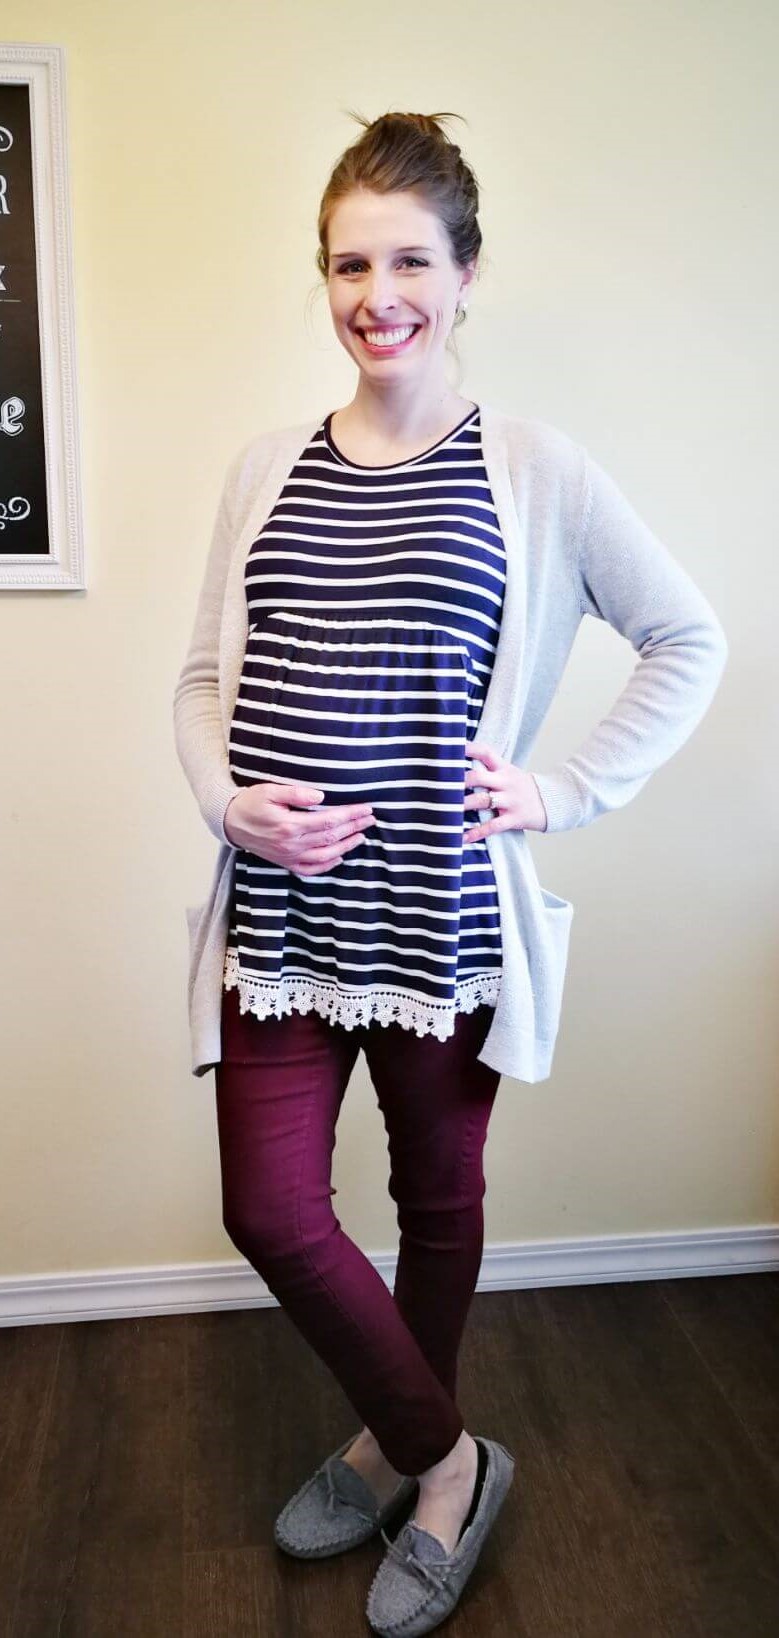 A navy blue and white striped shirt is so versatile! Here are 4 casual but chic ways to wear a striped #maternity tank top any time of the year... shows what to wear at home and how to change it to go on errands for total of 8 maternity outfits. So cute with the crochet trim! This blog has so many easy outfit ideas for busy moms. #mom #fashion #outfits #tips #ideas #easy #clothes #style #fall #winter #spring #summer #momlife #pregnancy #clothes #style